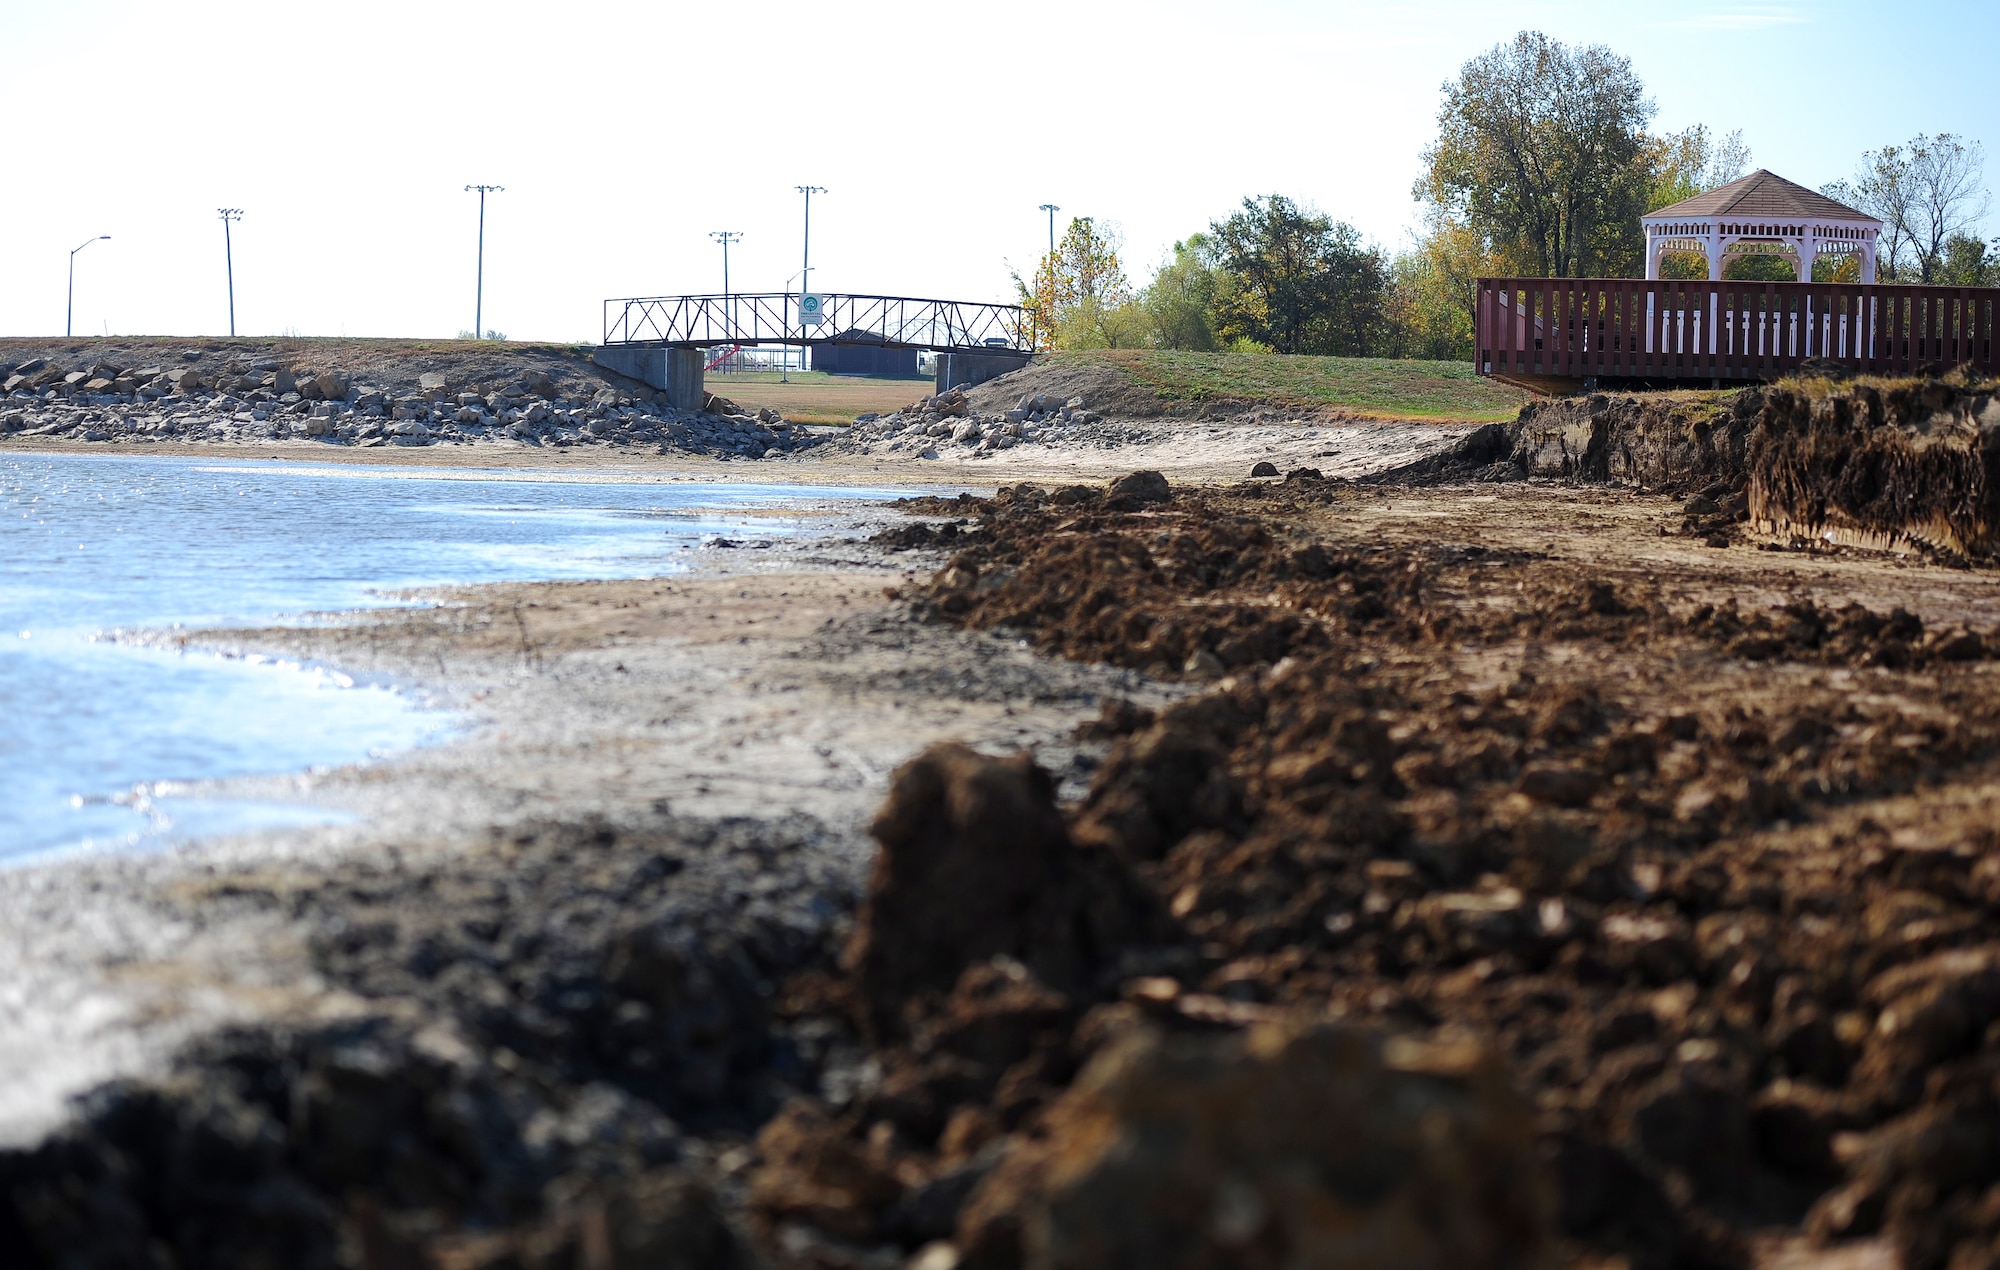 The shoreline at Ike Skelton Lake is exposed Oct. 20, 2015, following a draining performed by contractors at Whiteman Air Force Base, Mo. The water level was lowered as part of an on-going project which includes the installation of a brick wall along the water’s edge. Following the shoreline reinforcement, the water level will be raised higher than normal, which decreases the algae and weed growth in the shallow areas of the pond. The shoreline is scheduled to be closed until December 2015. (U.S. Air Force photo by Airman 1st Class Jazmin Smith/Released)